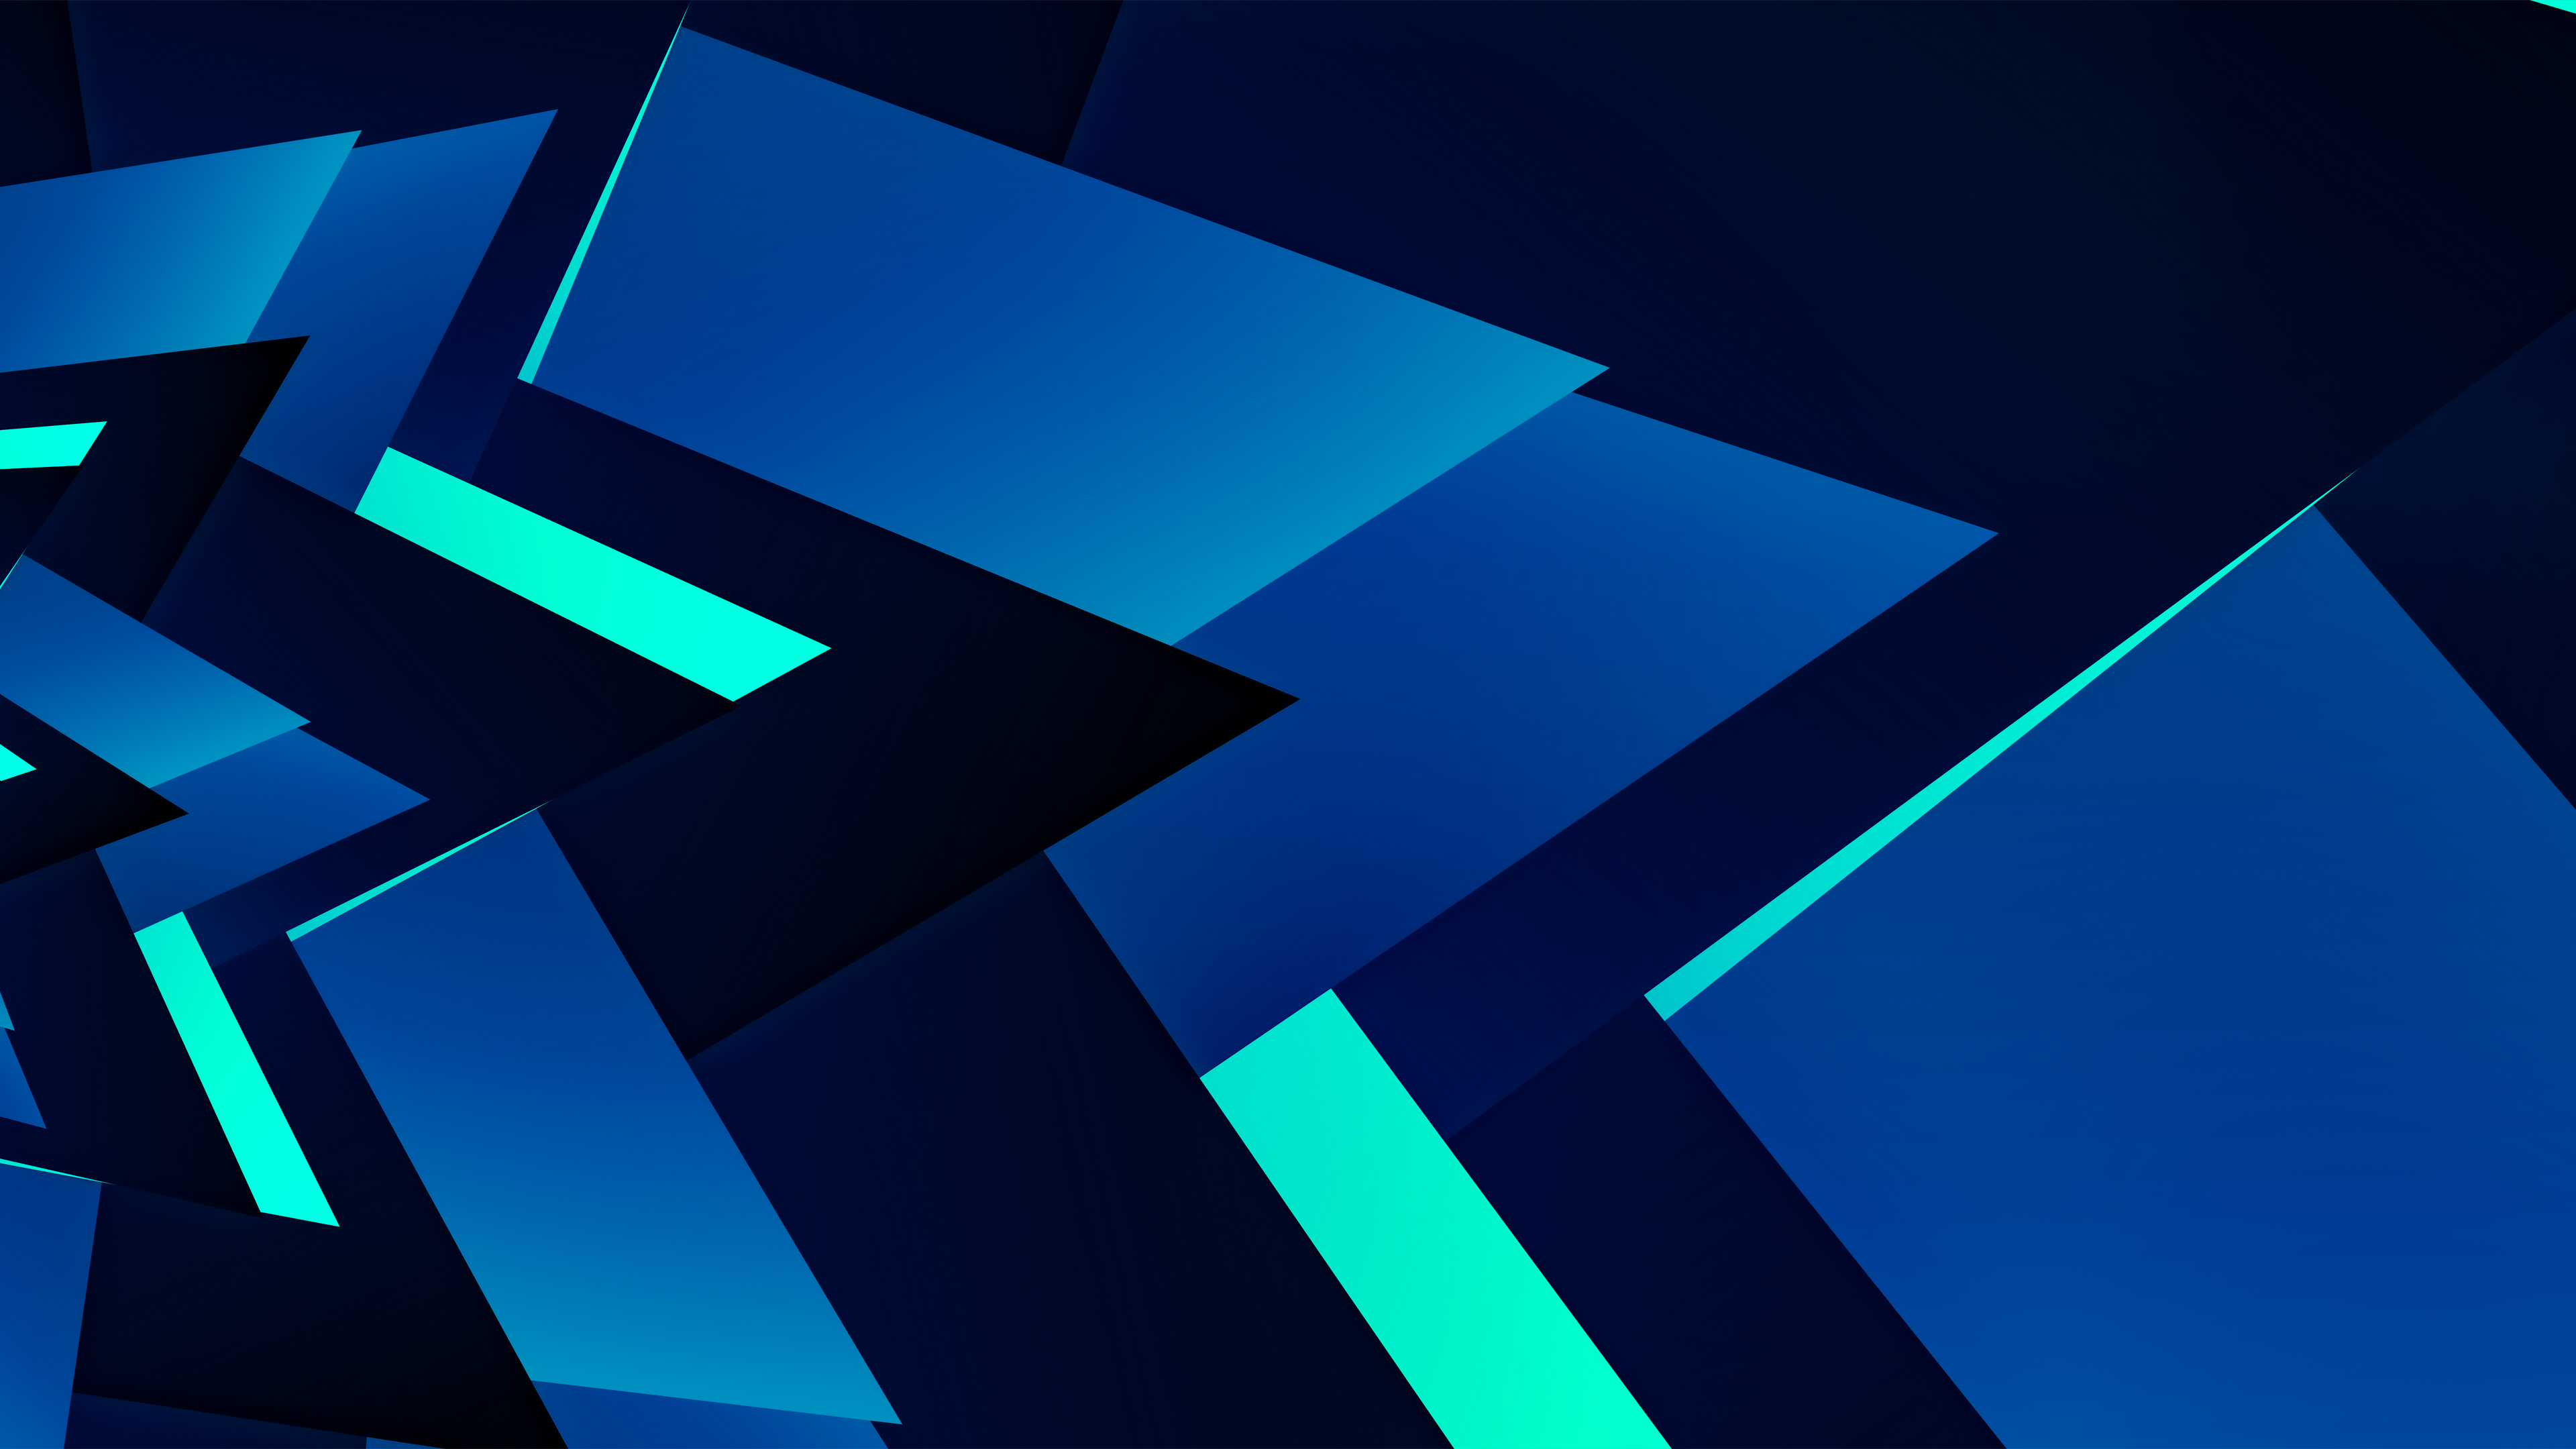 Abstract Geometry 3840x2160